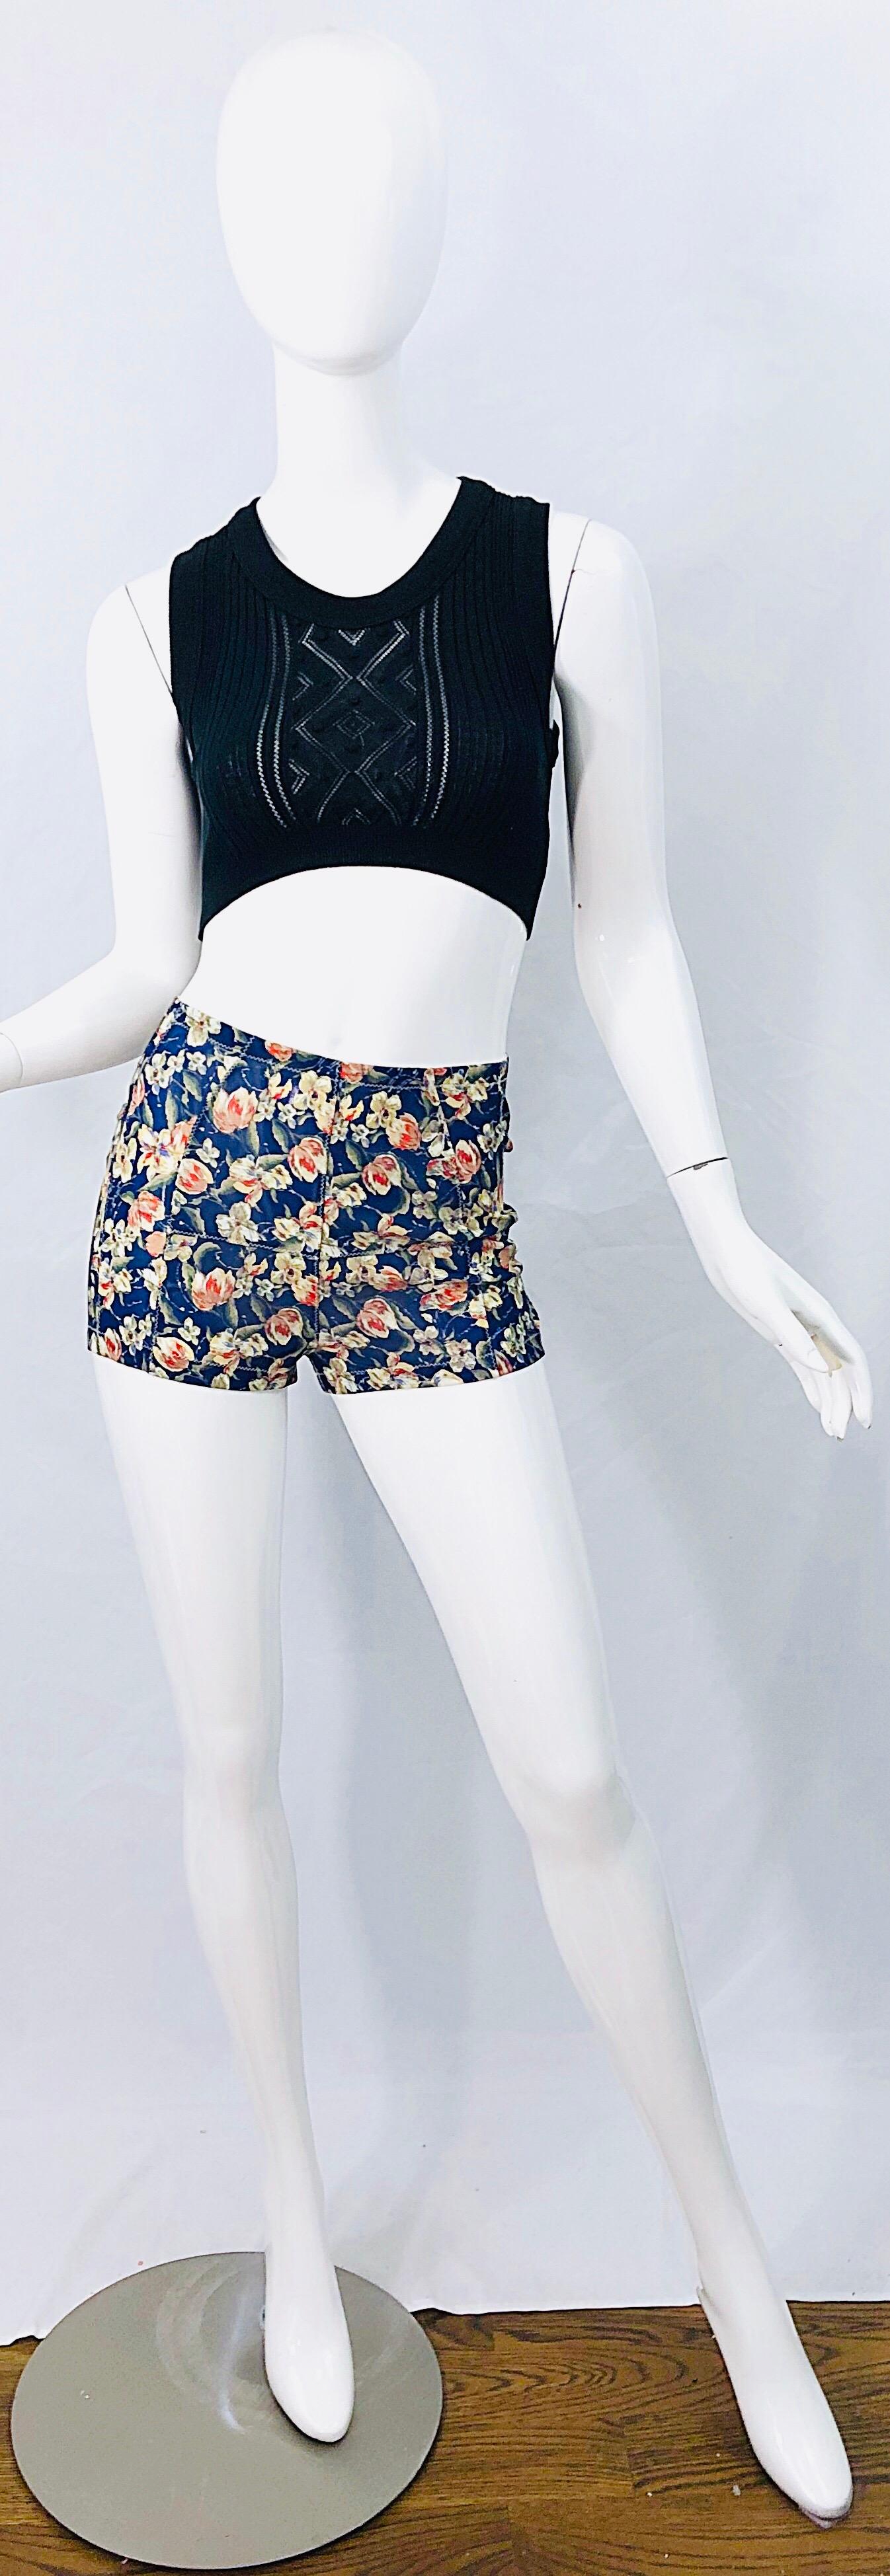 Sexy late 90s ROBERTO CAVALLI navy blue flower print mesh shorts / hot pants ! Features warm colors of orange, red, green, yellow and cream throughout. Simply slips on and stretches to fit. The pictured 90s 
Jean Paul Gaultier black crop top is also